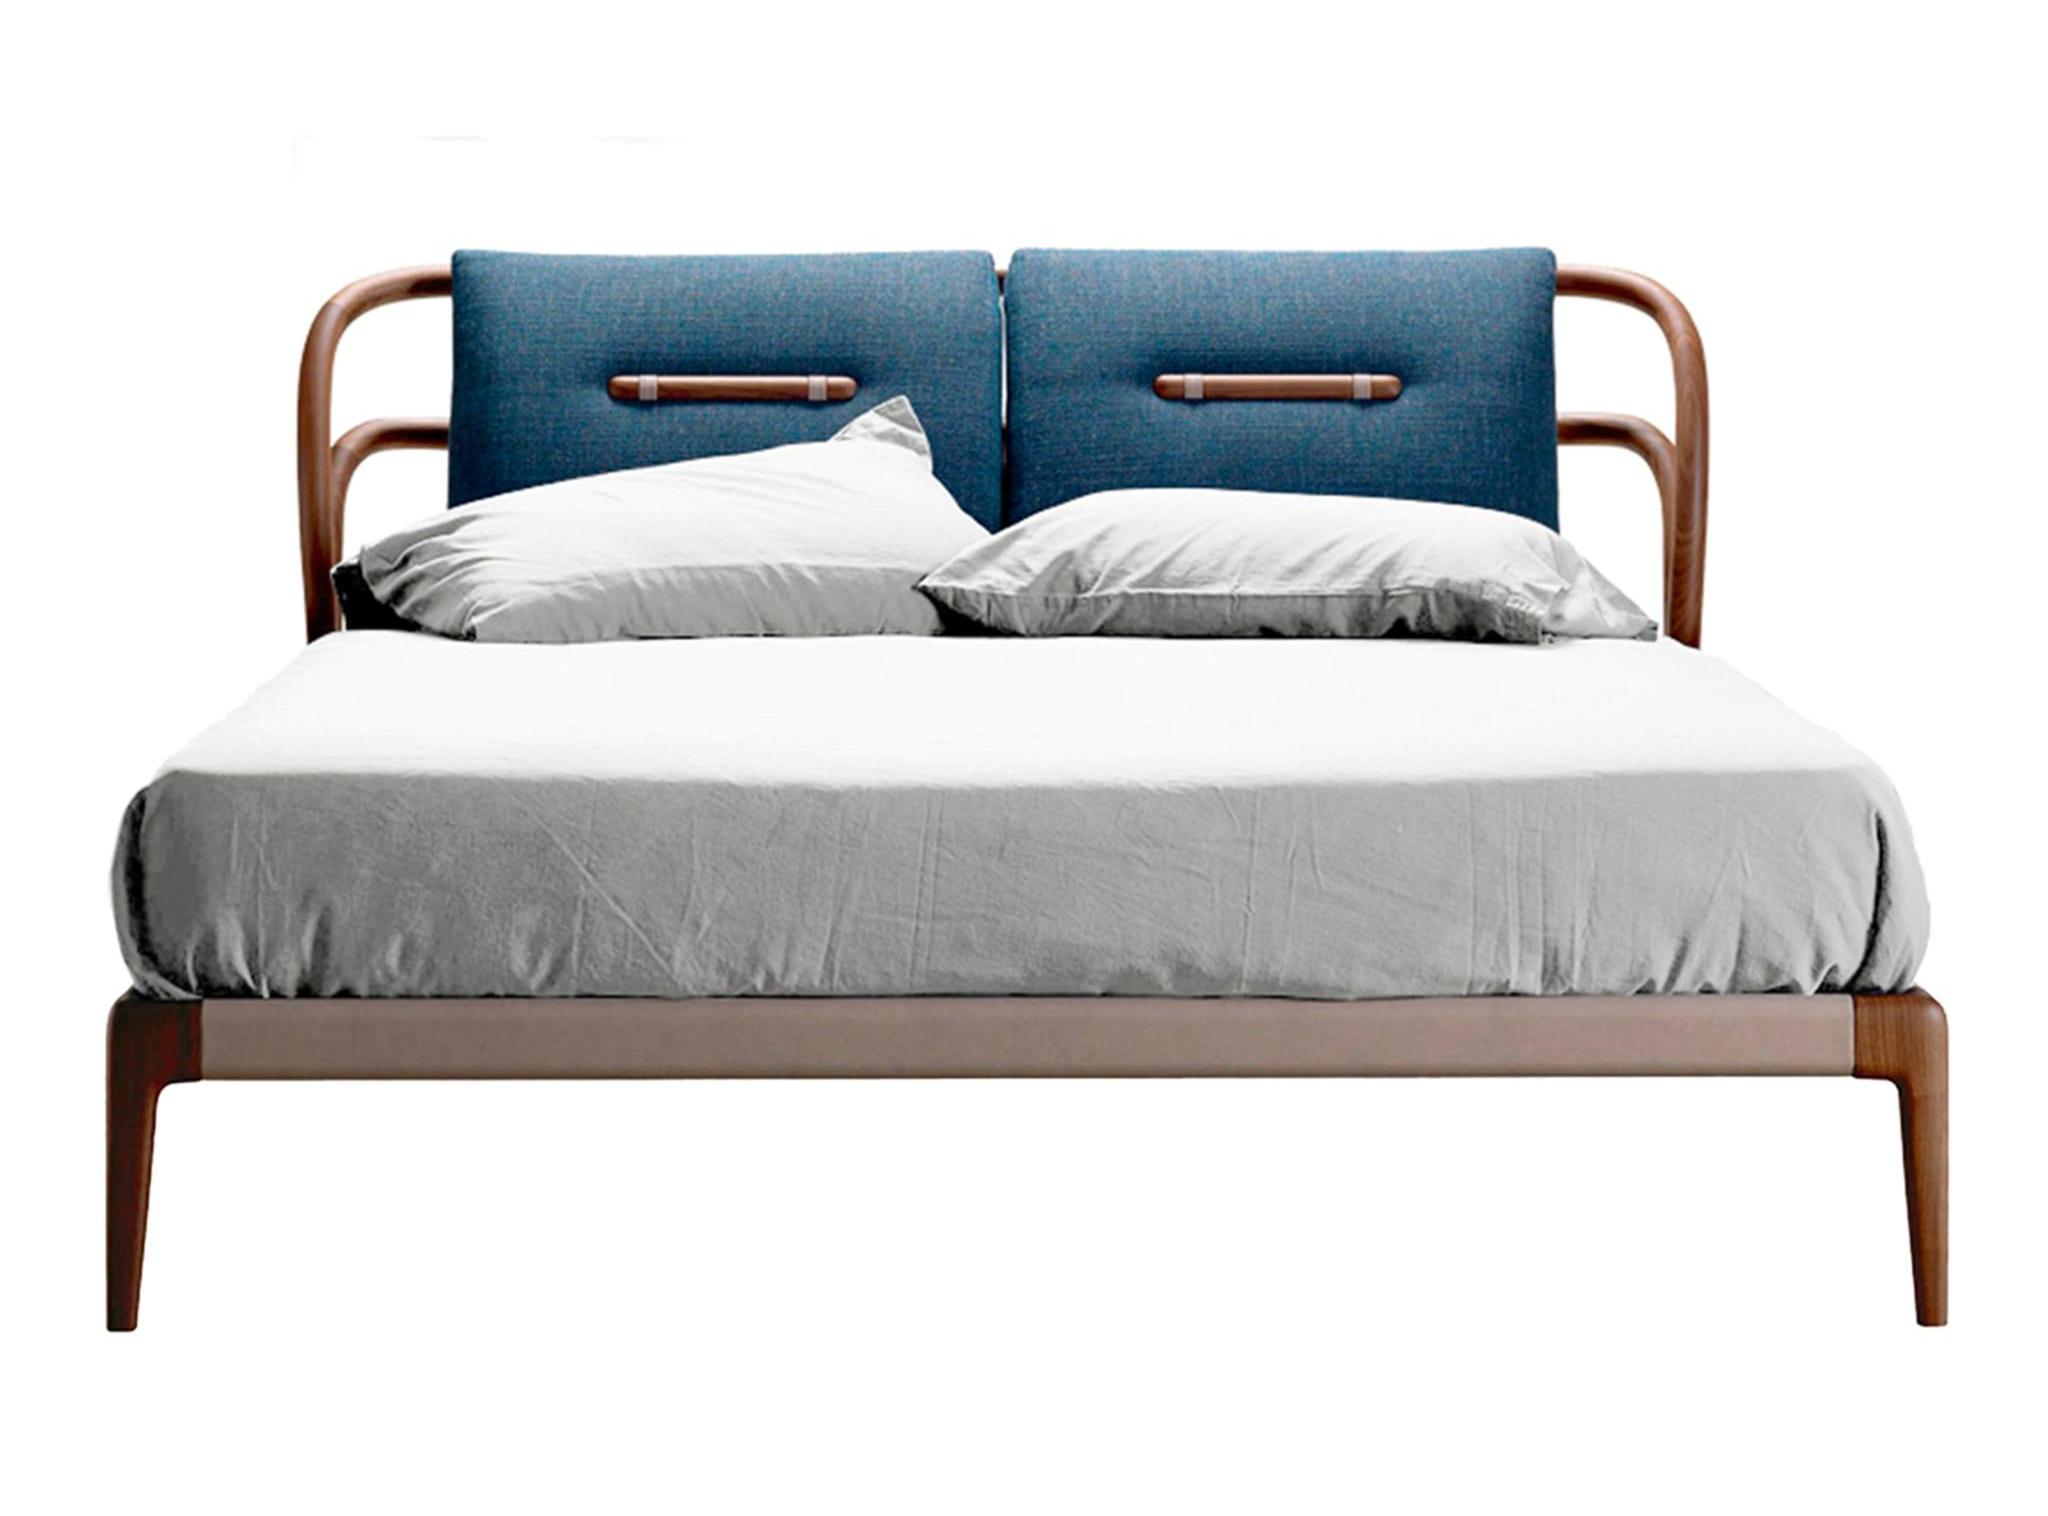 Smusso Modern Italian Bed